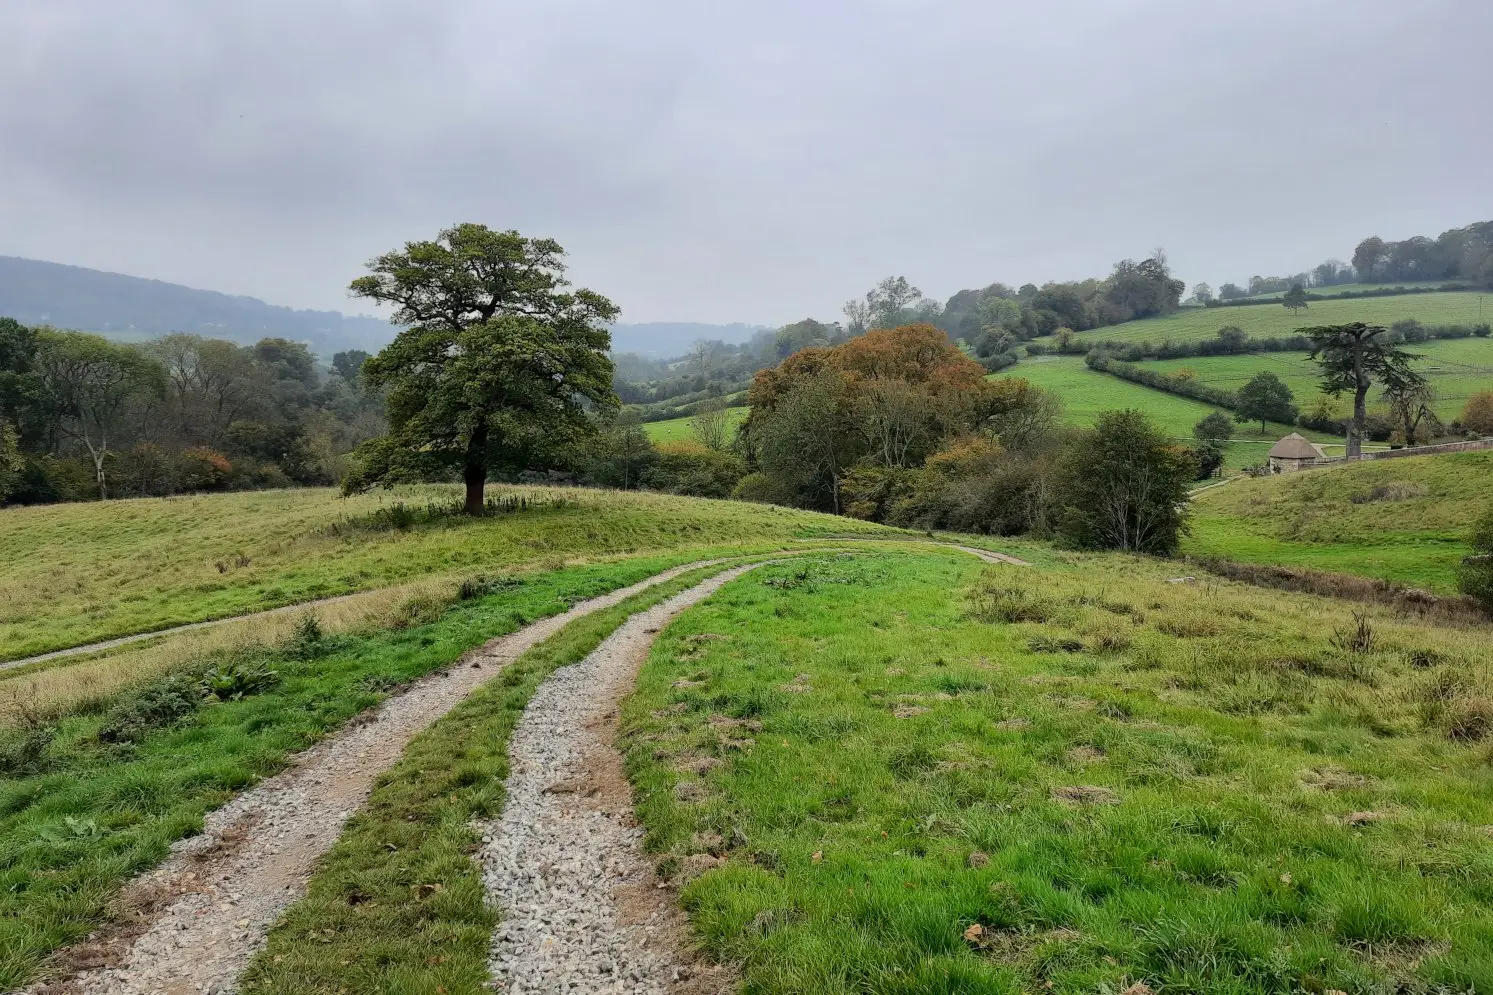 Cotswold rolling hills and enchanting valleys in the Painswick Beacon, Coopers Hill & Painswick Valley walk